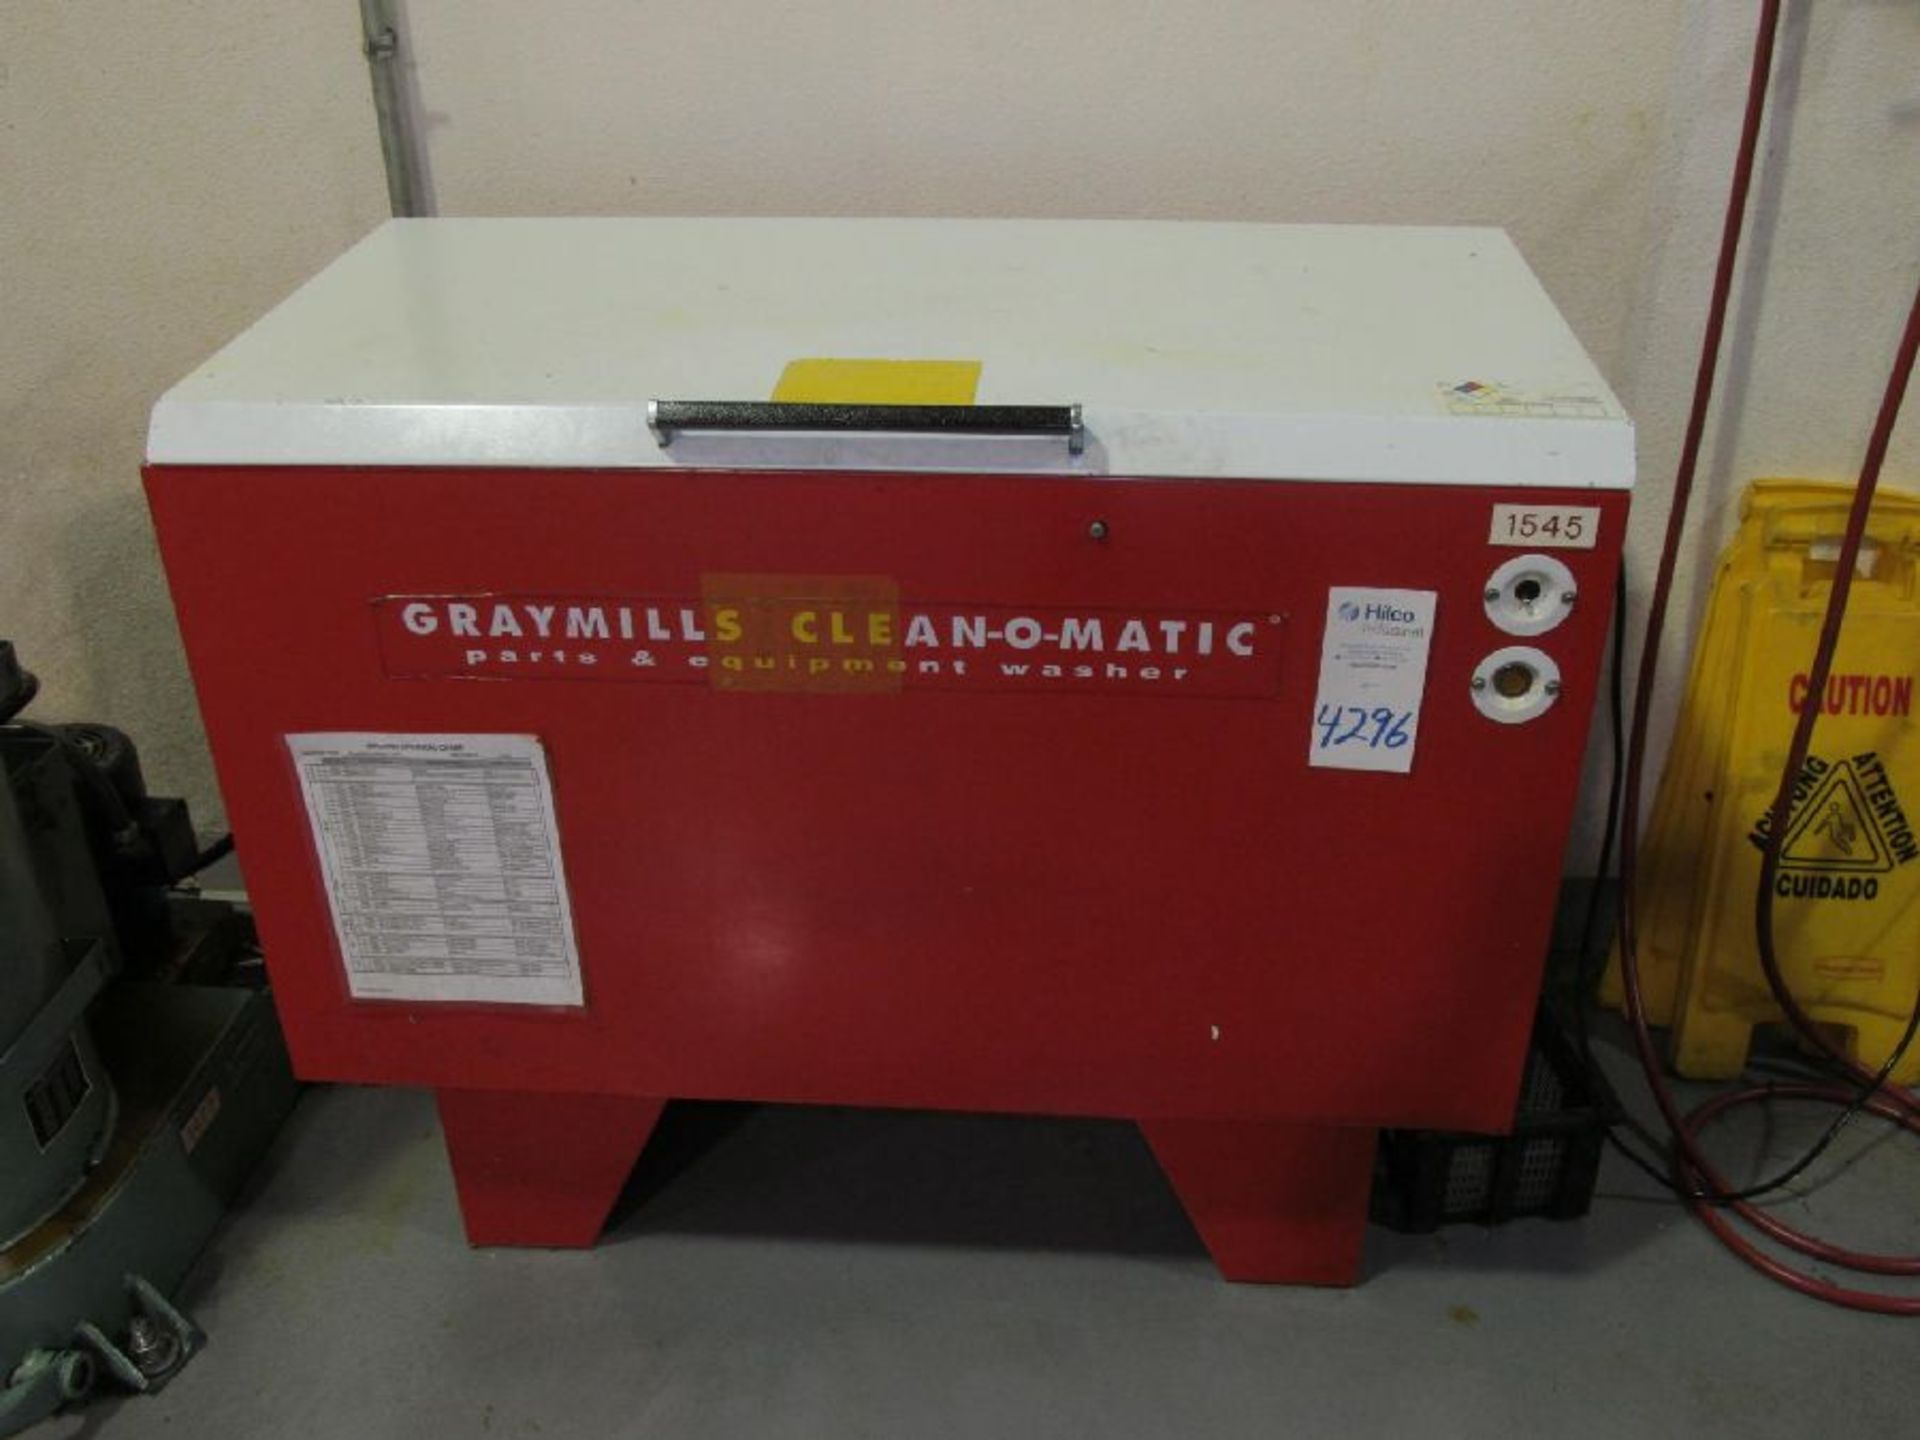 Graymills Model Clean-O -Matic Parts Washer